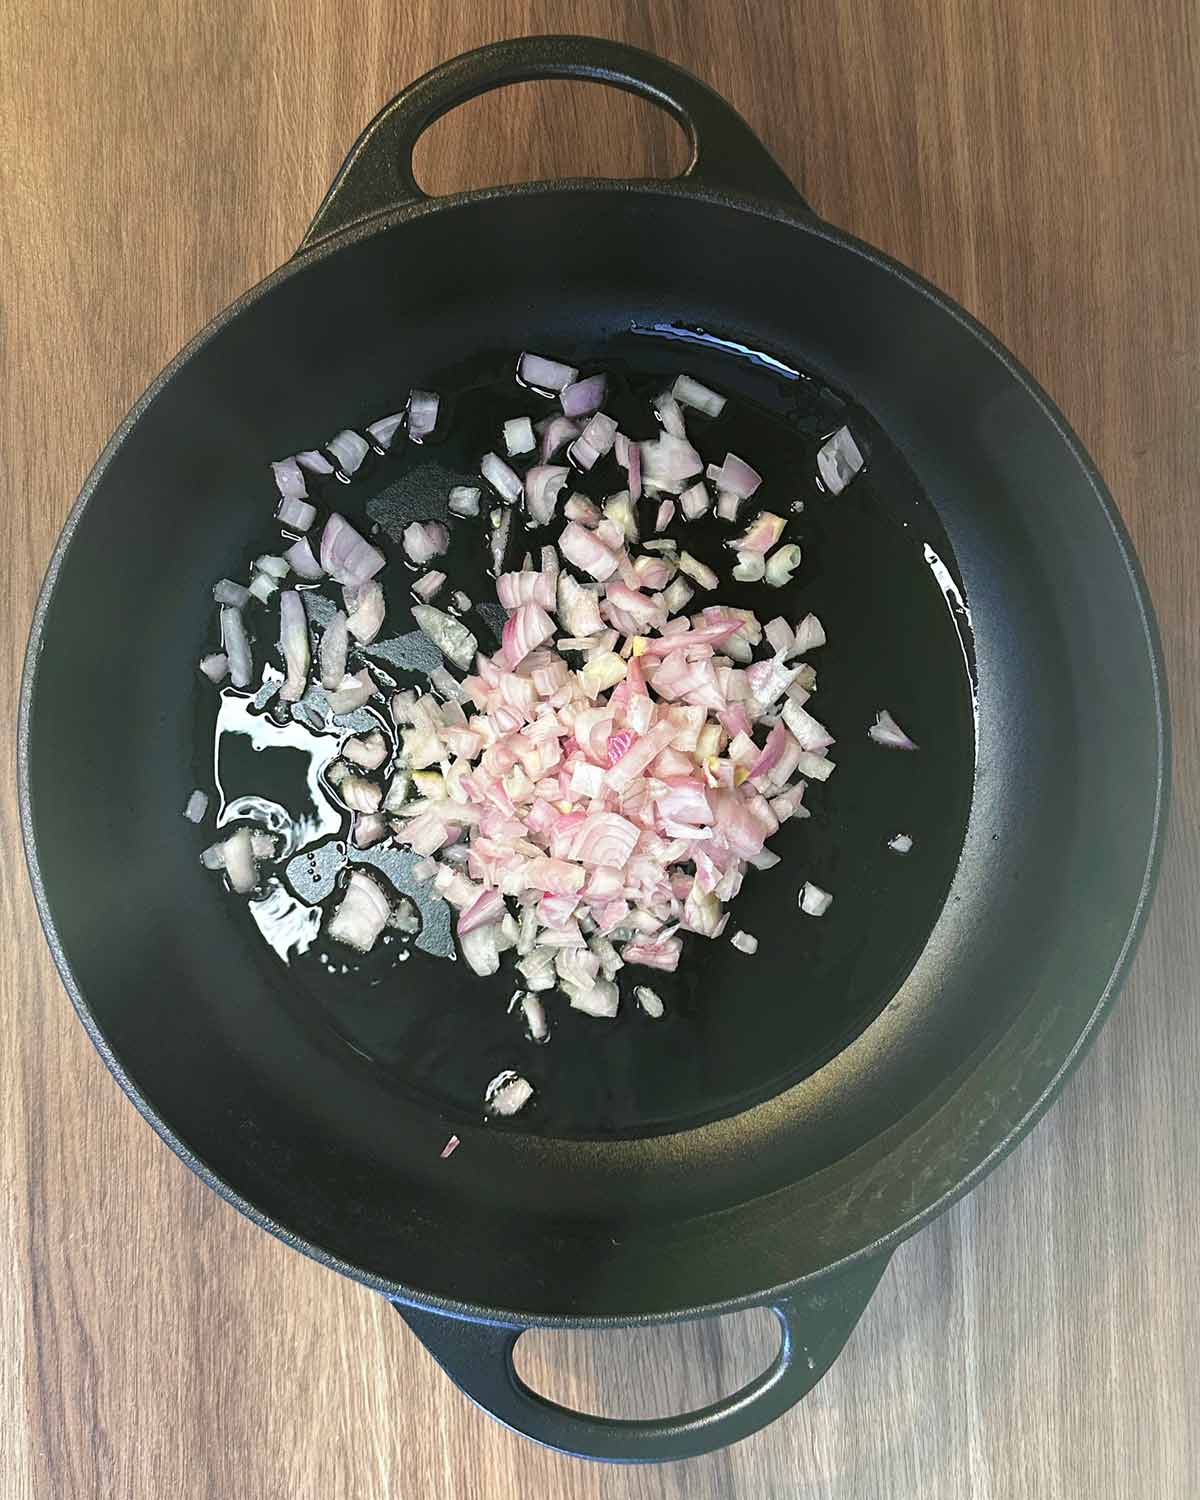 Chopped shallots frying in a pan.